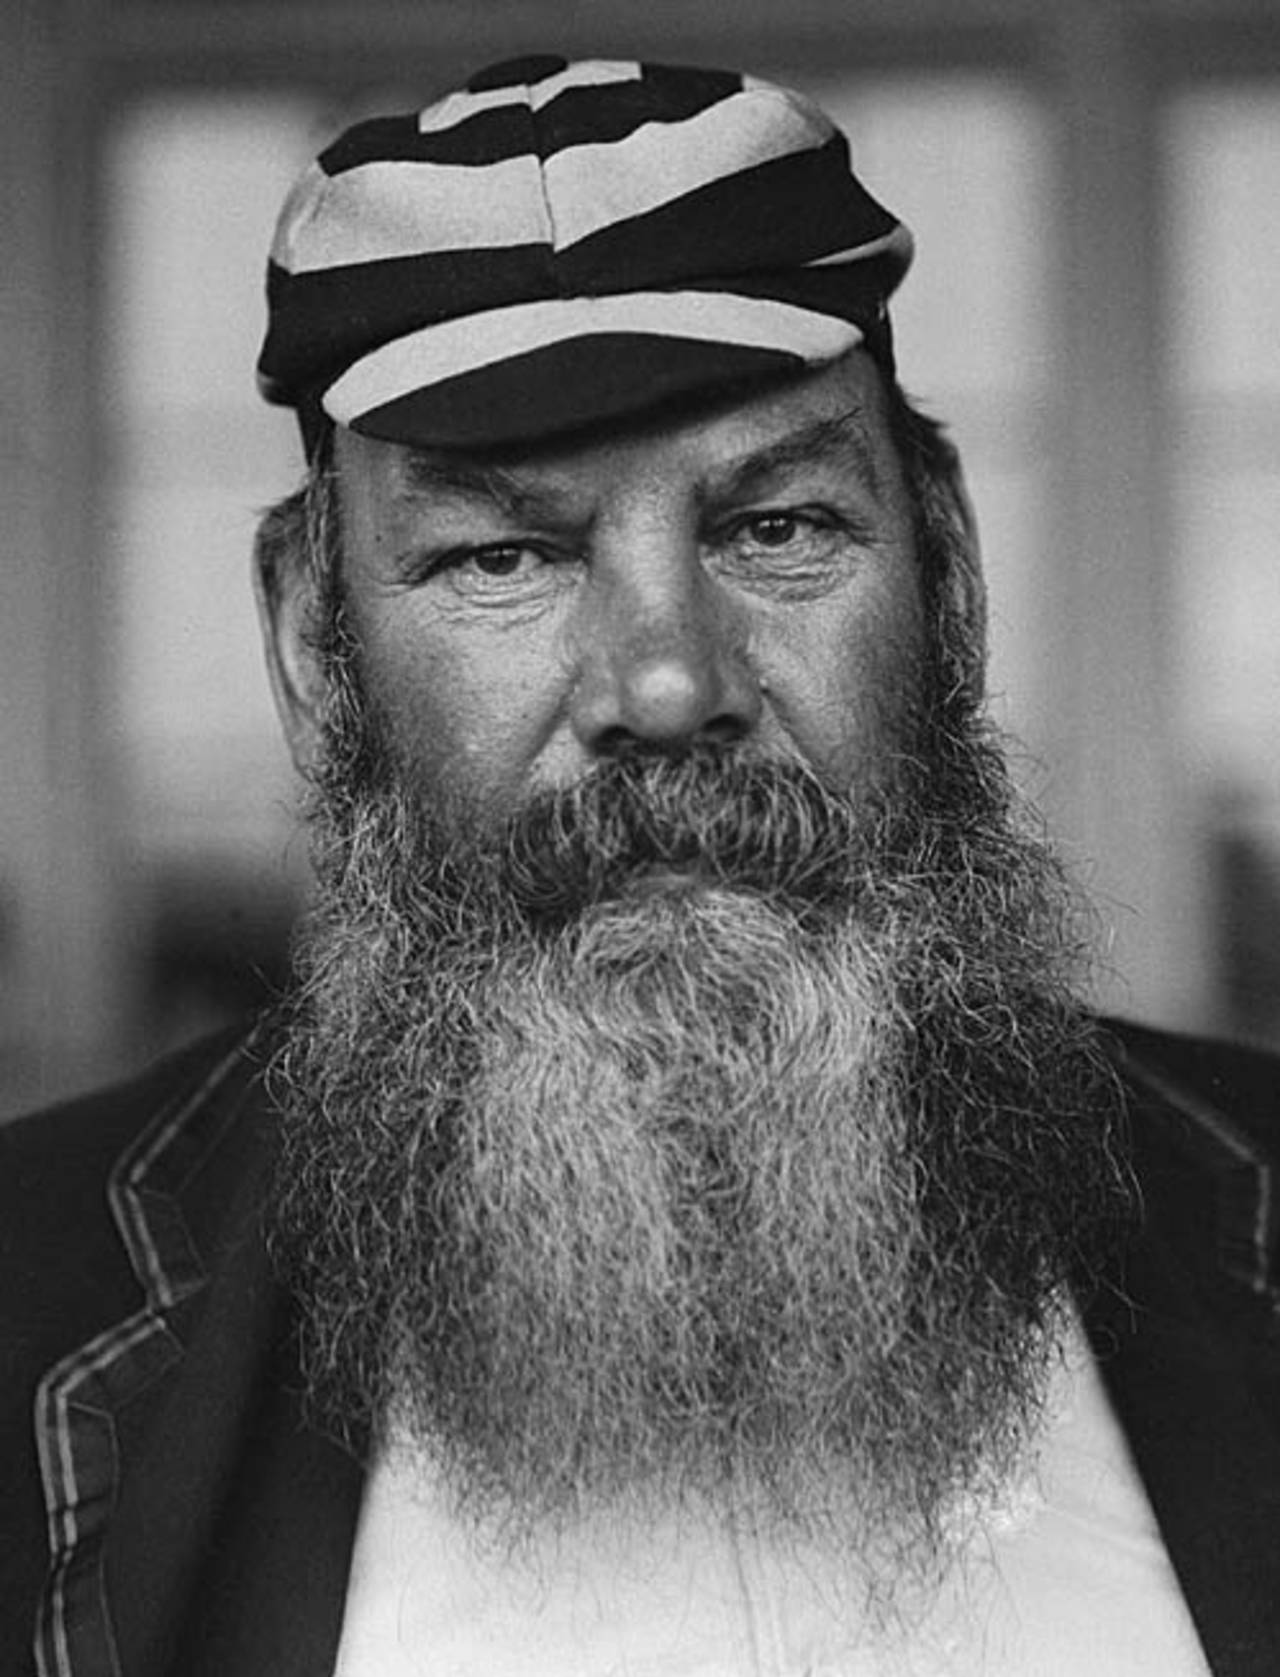 A colossus of the game, WG's beard had the thickness of a wombat, badger or wolverine carcass&nbsp;&nbsp;&bull;&nbsp;&nbsp;ESPNcricinfo Ltd